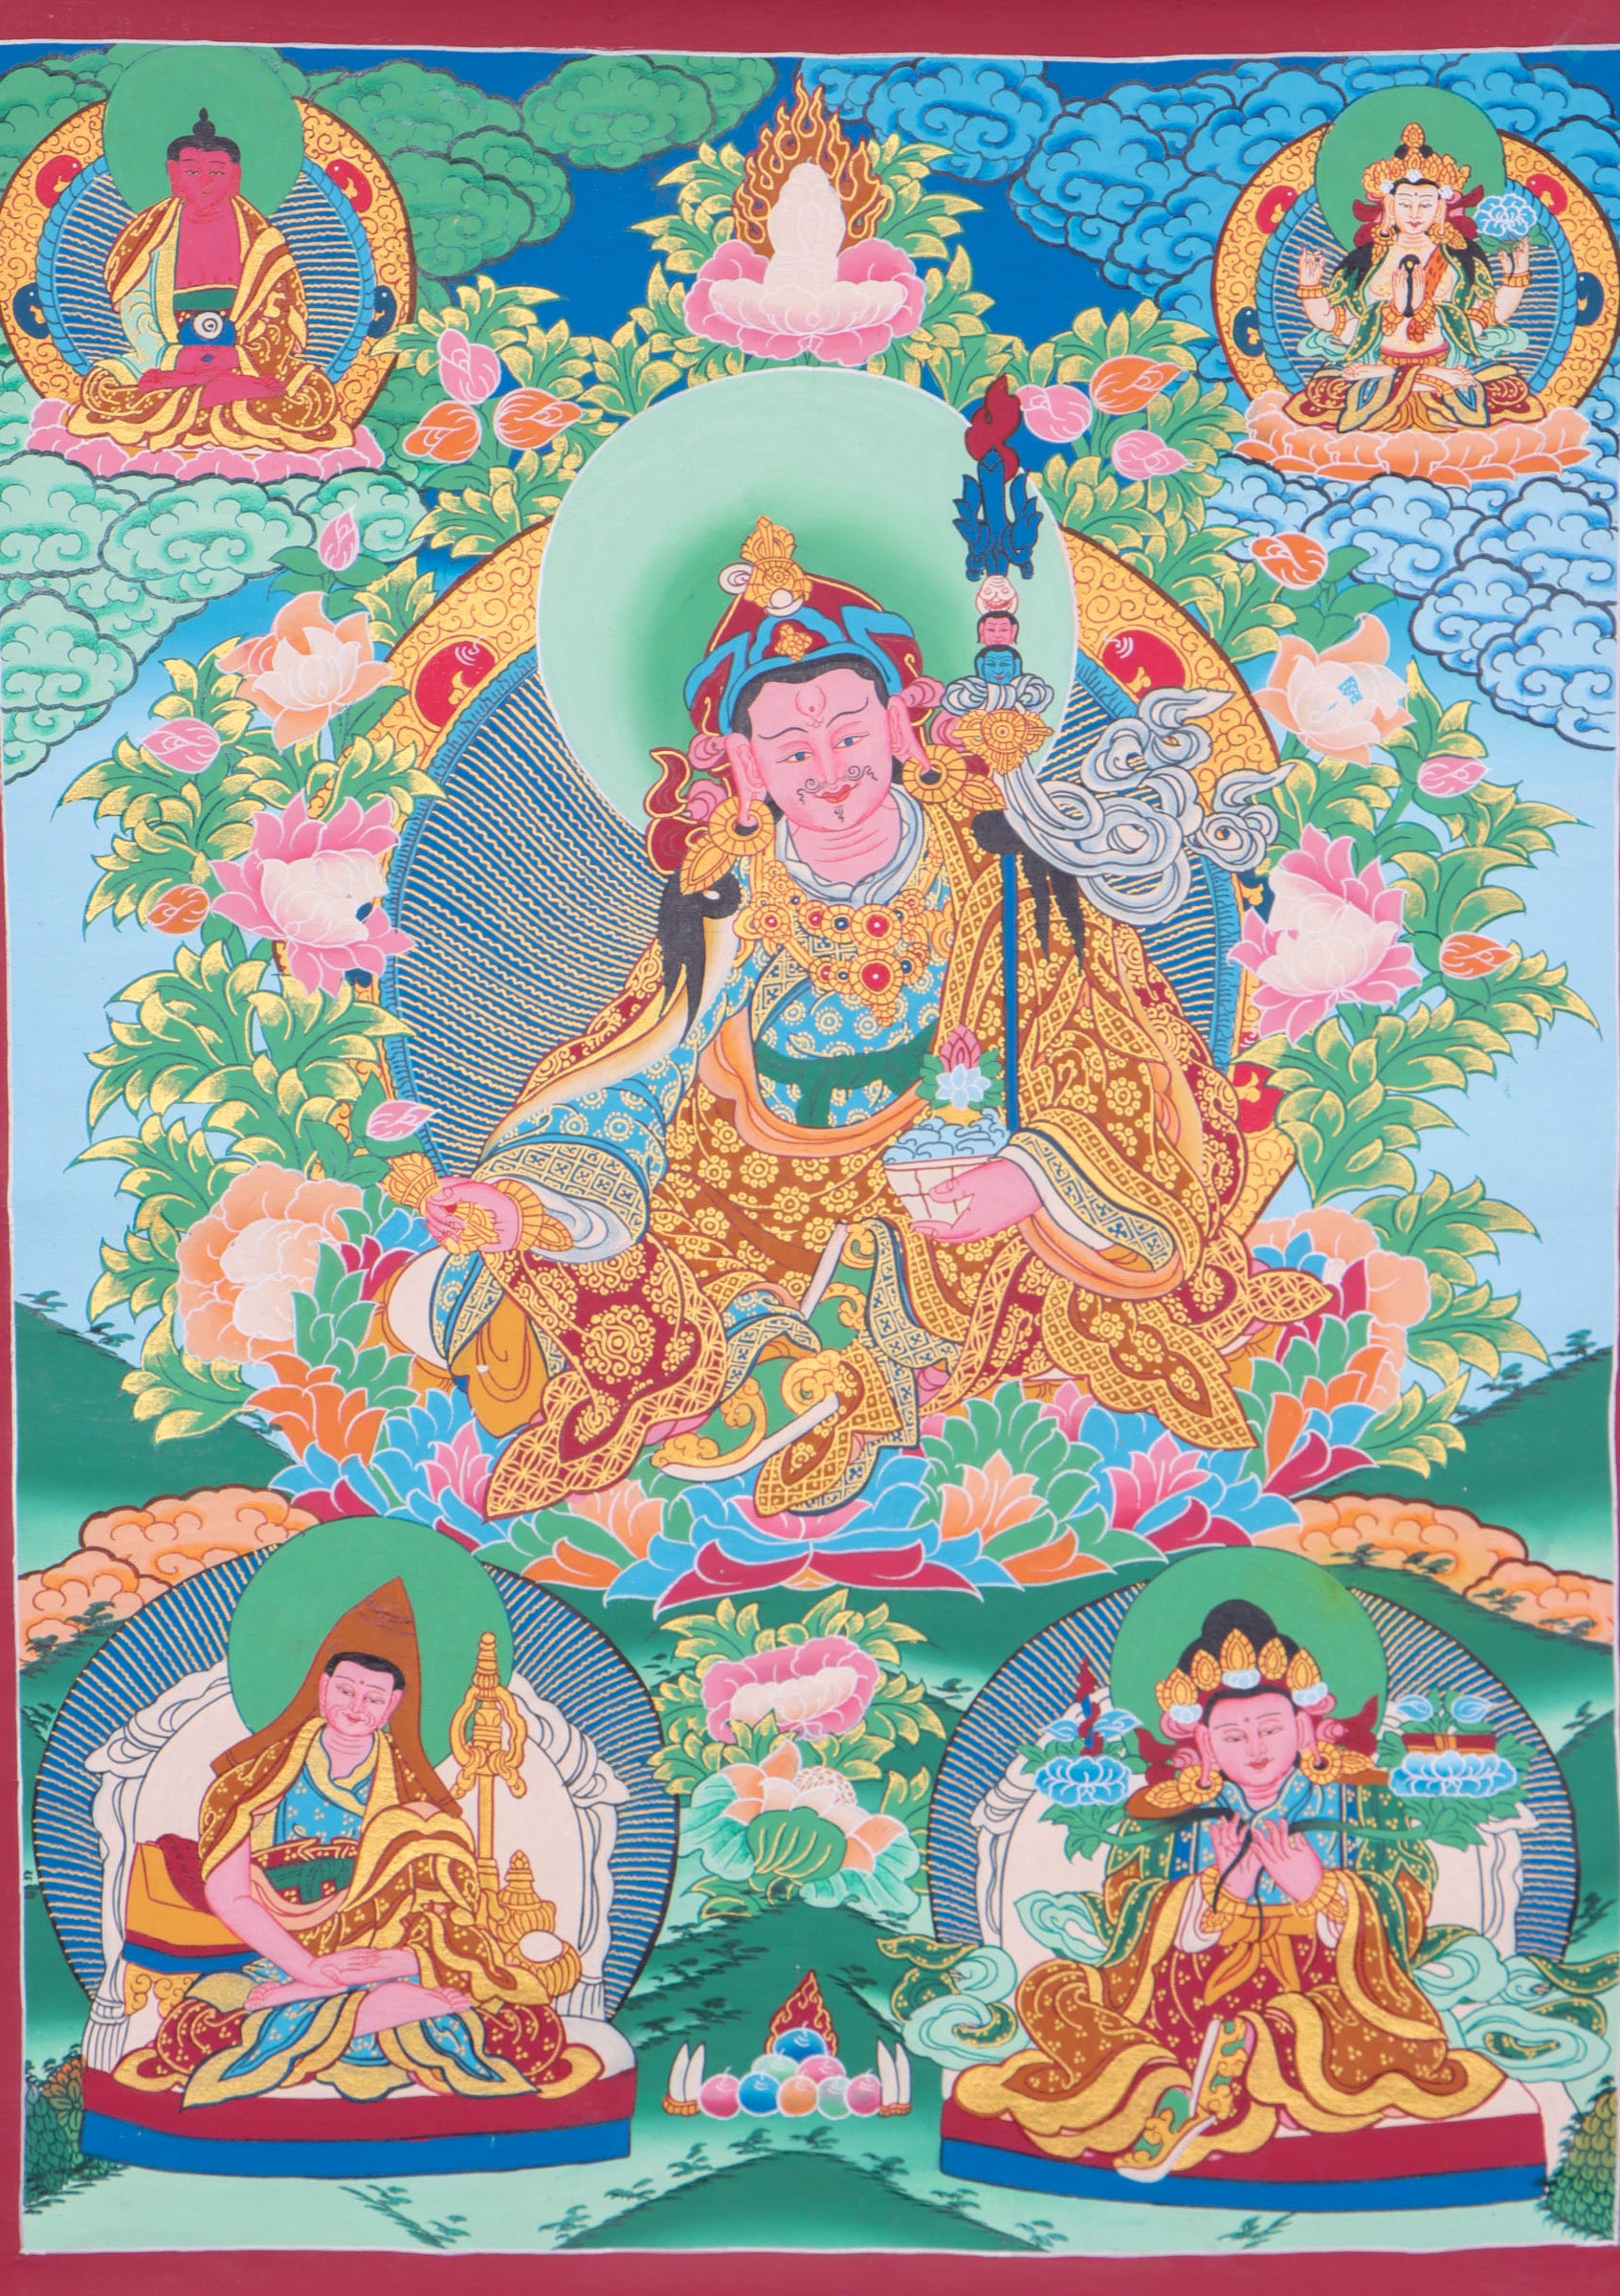 Guru Rinpoche Thangka helps to purify negative karma, and bring about inner peace and well-being. 